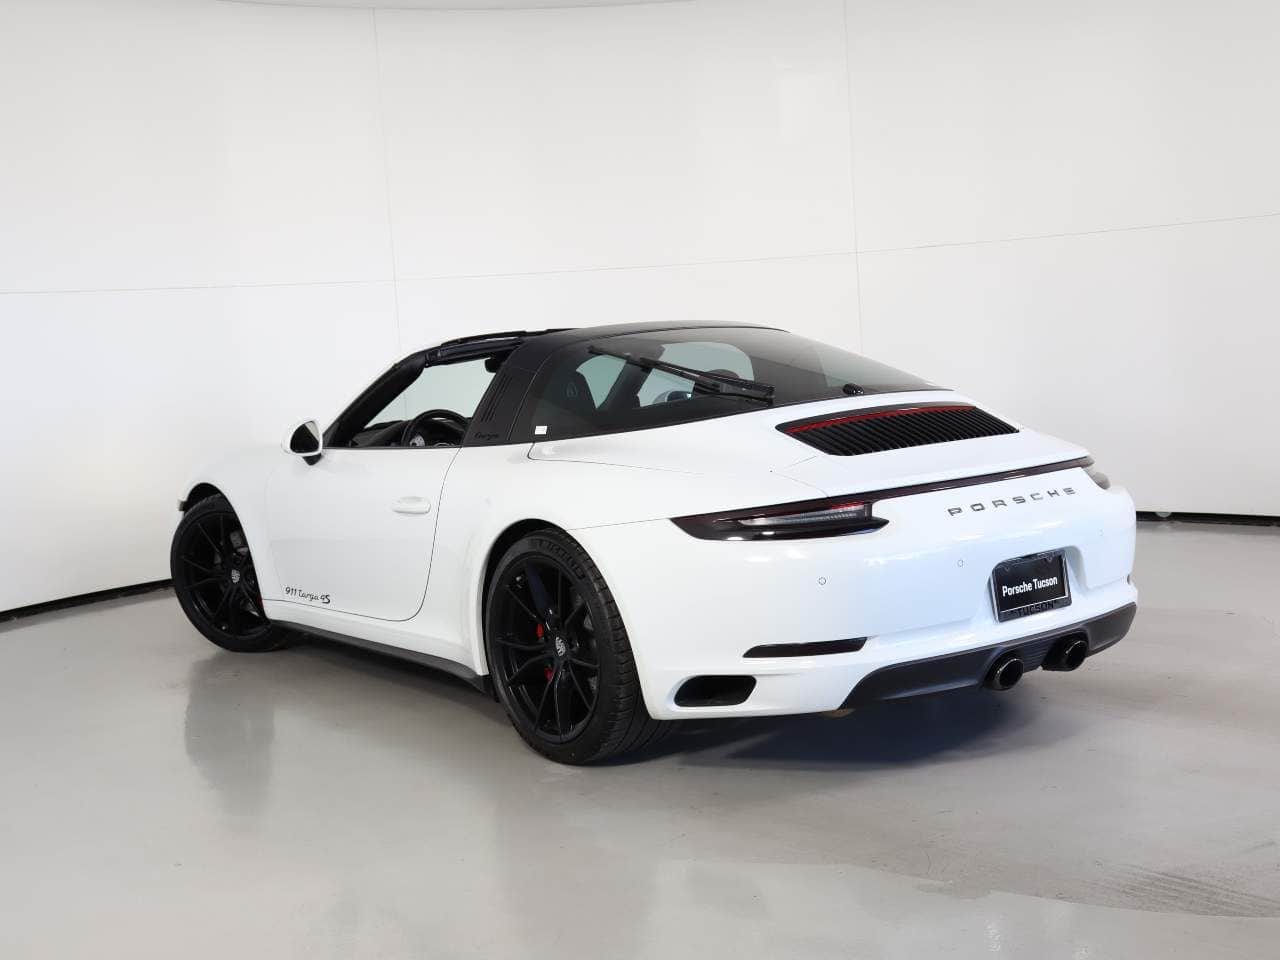 2019 Porsche 911 - Beautiful 2019 Targa 4S! Well Optioned! Front PPF! Excellent Condition! PDK! CPO Avai - Used - Tucson, AZ 85711, United States